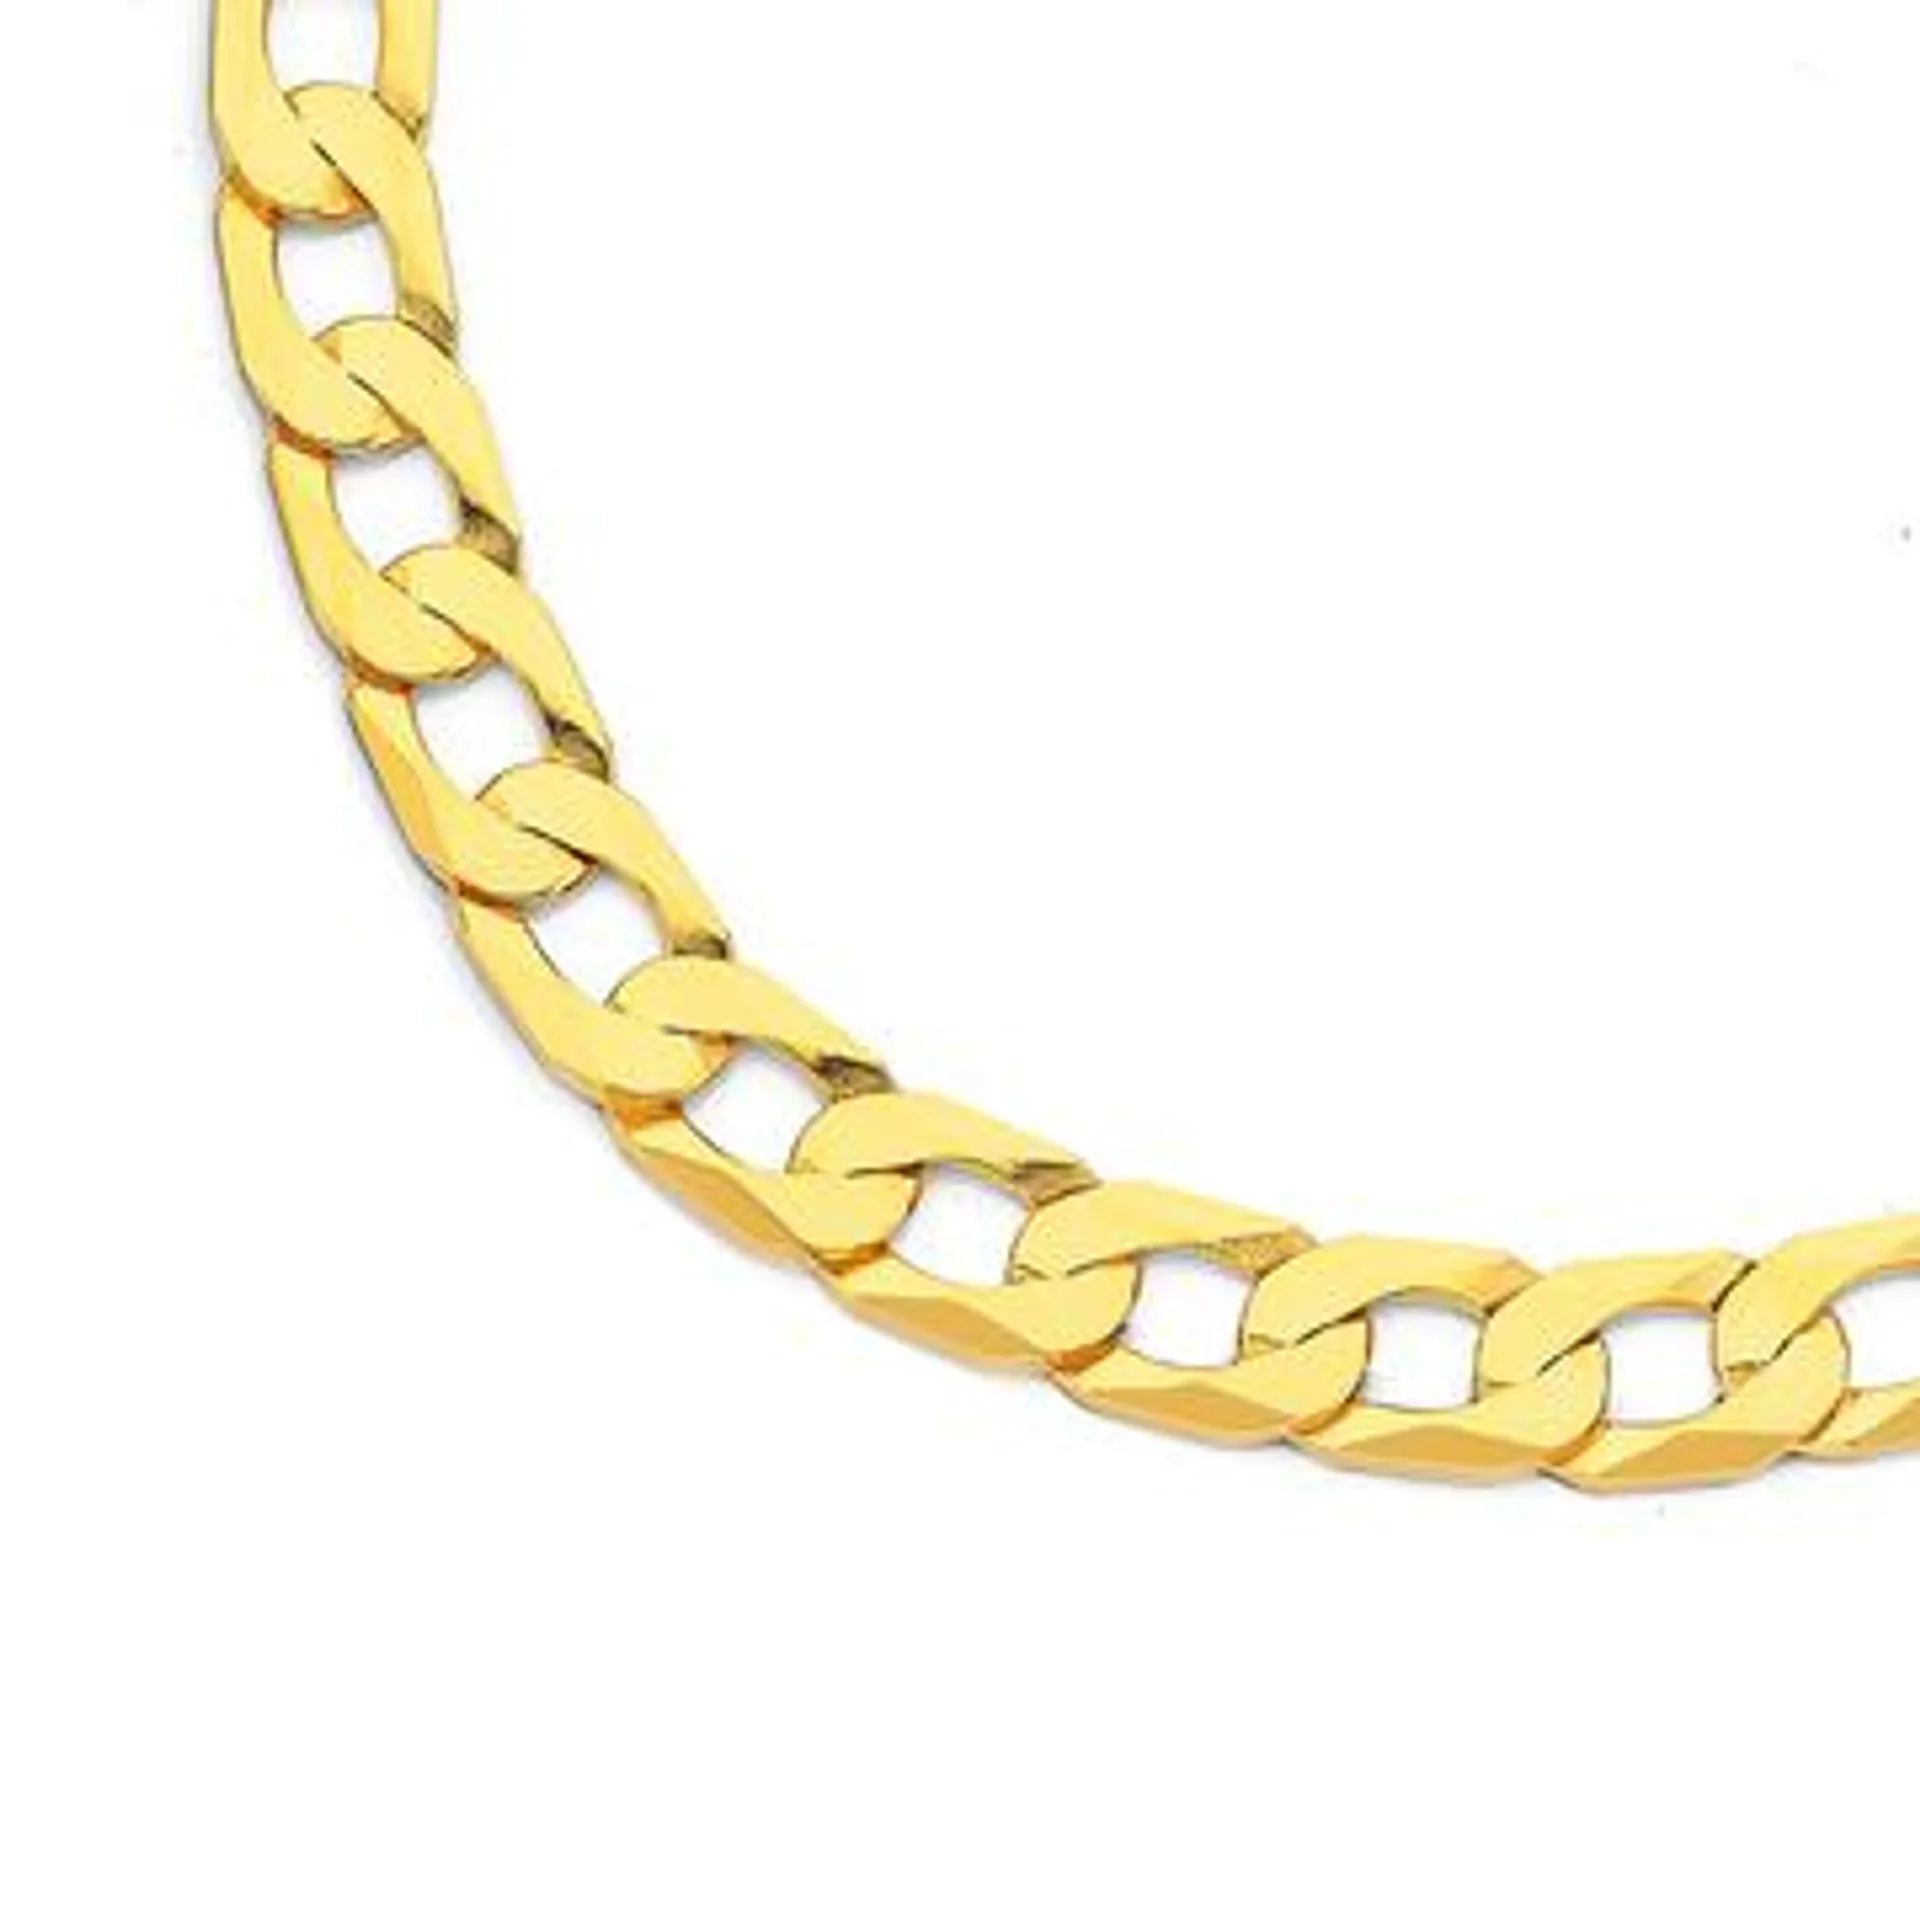 9ct, 50cm Solid Flat Bevelled Curb Chain